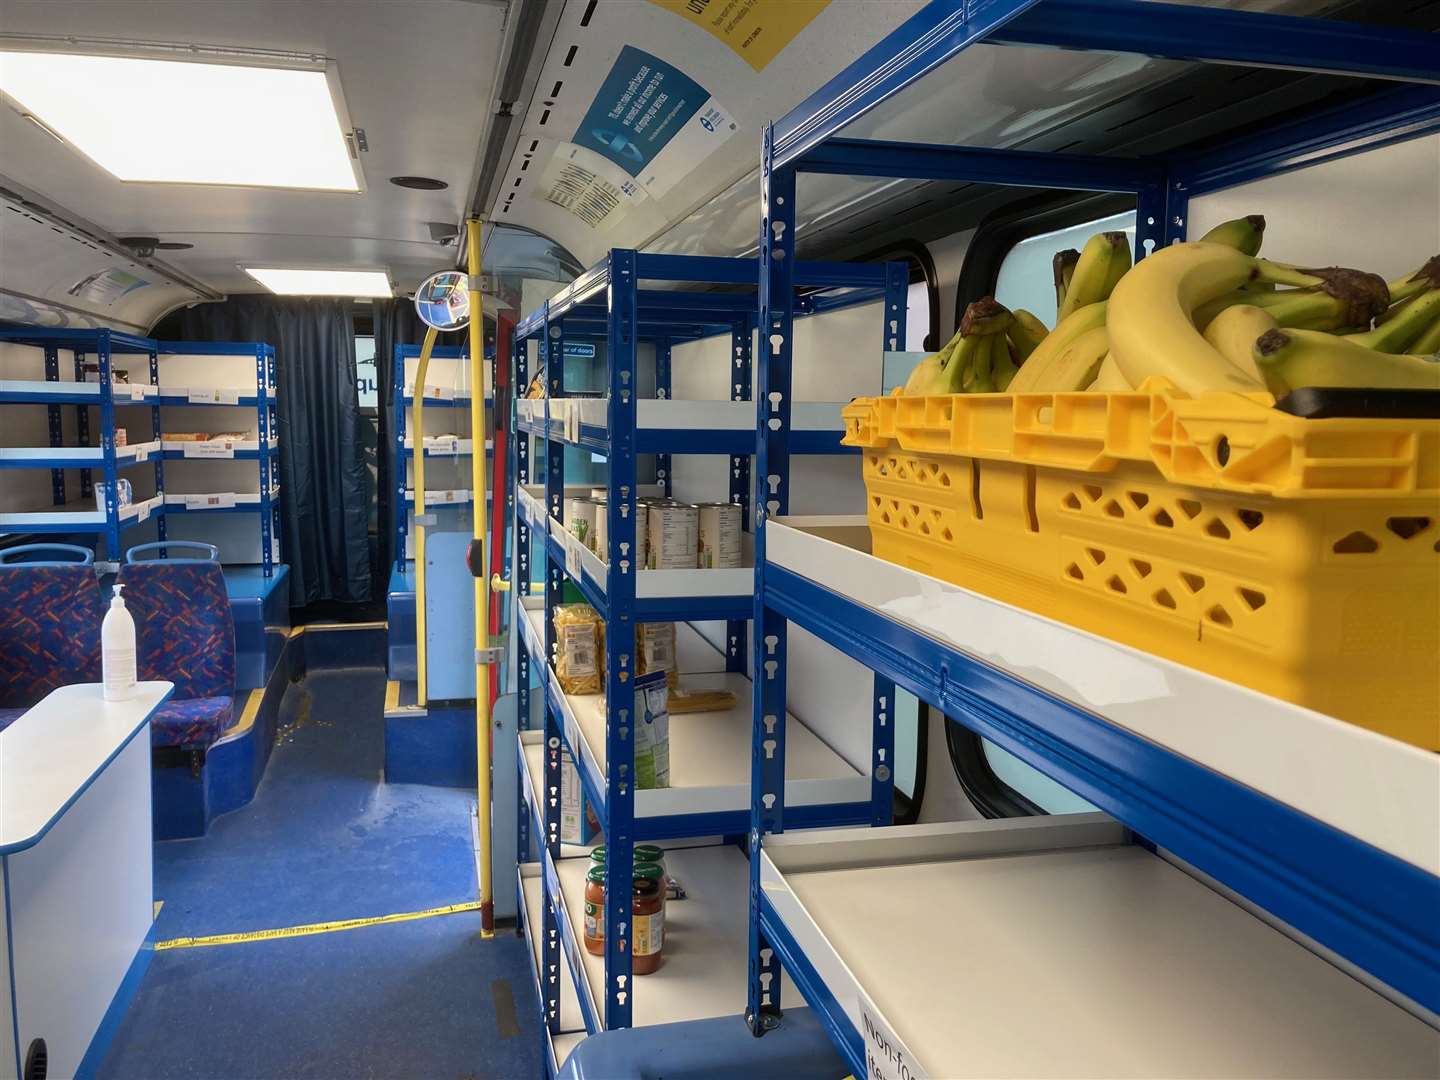 Inside the Sheppey Support Bus which will be used as a mobile community supermarket downstairs